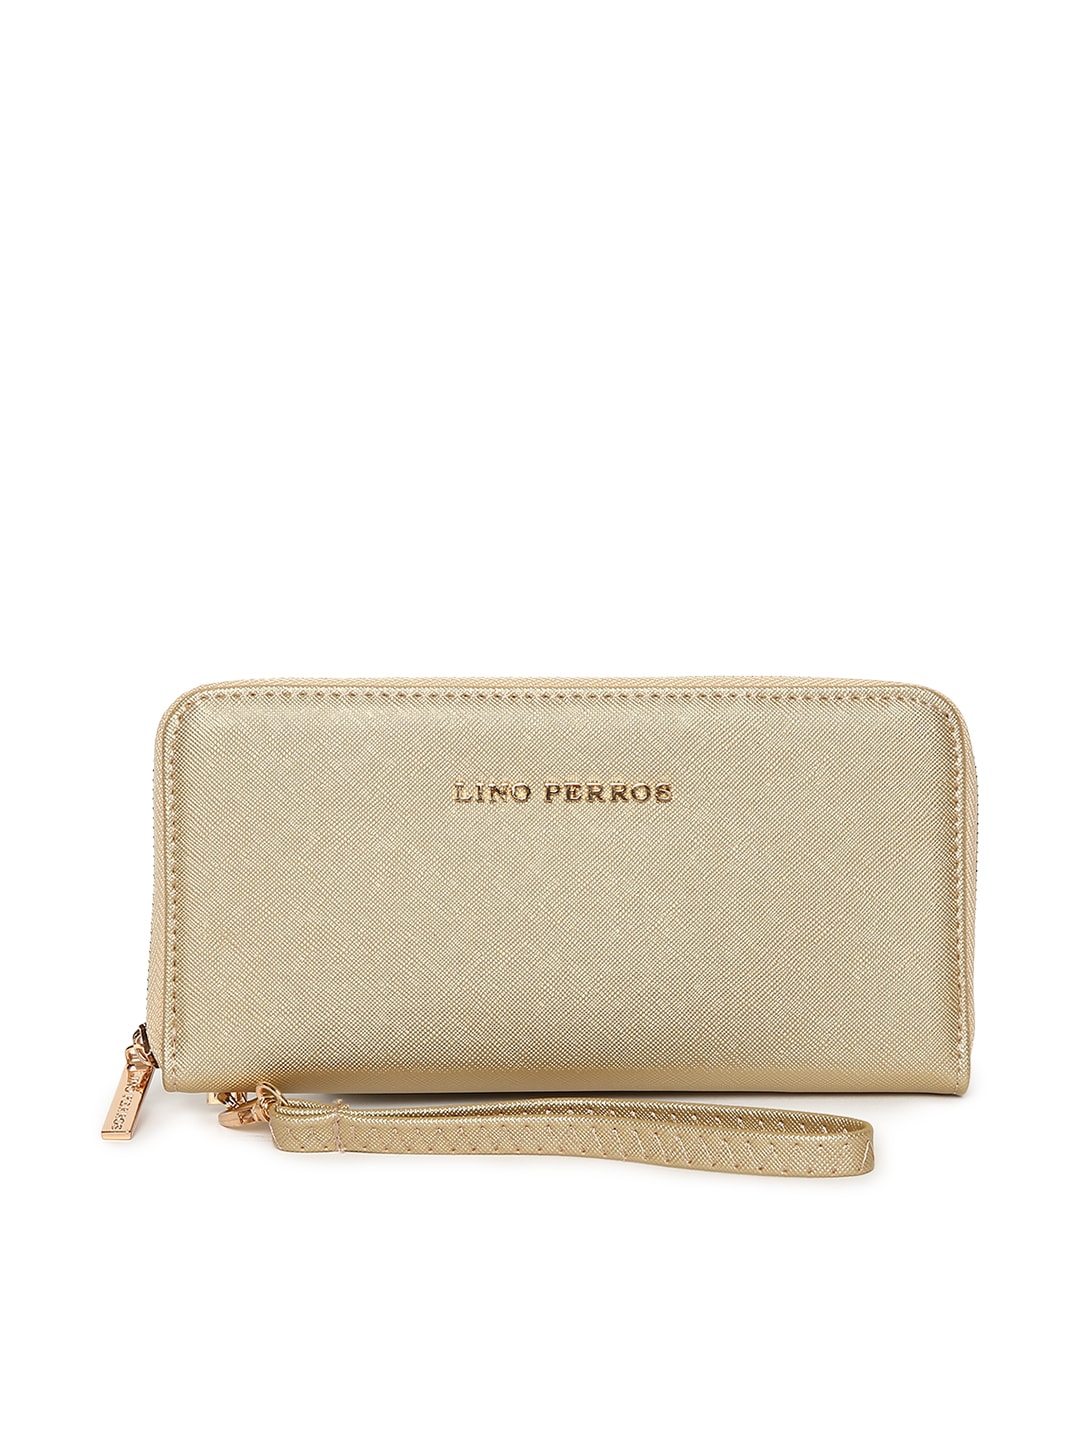 Lino Perros Women Gold-Toned Solid Zip Around Wallet with Detachable Wrist Loop Price in India